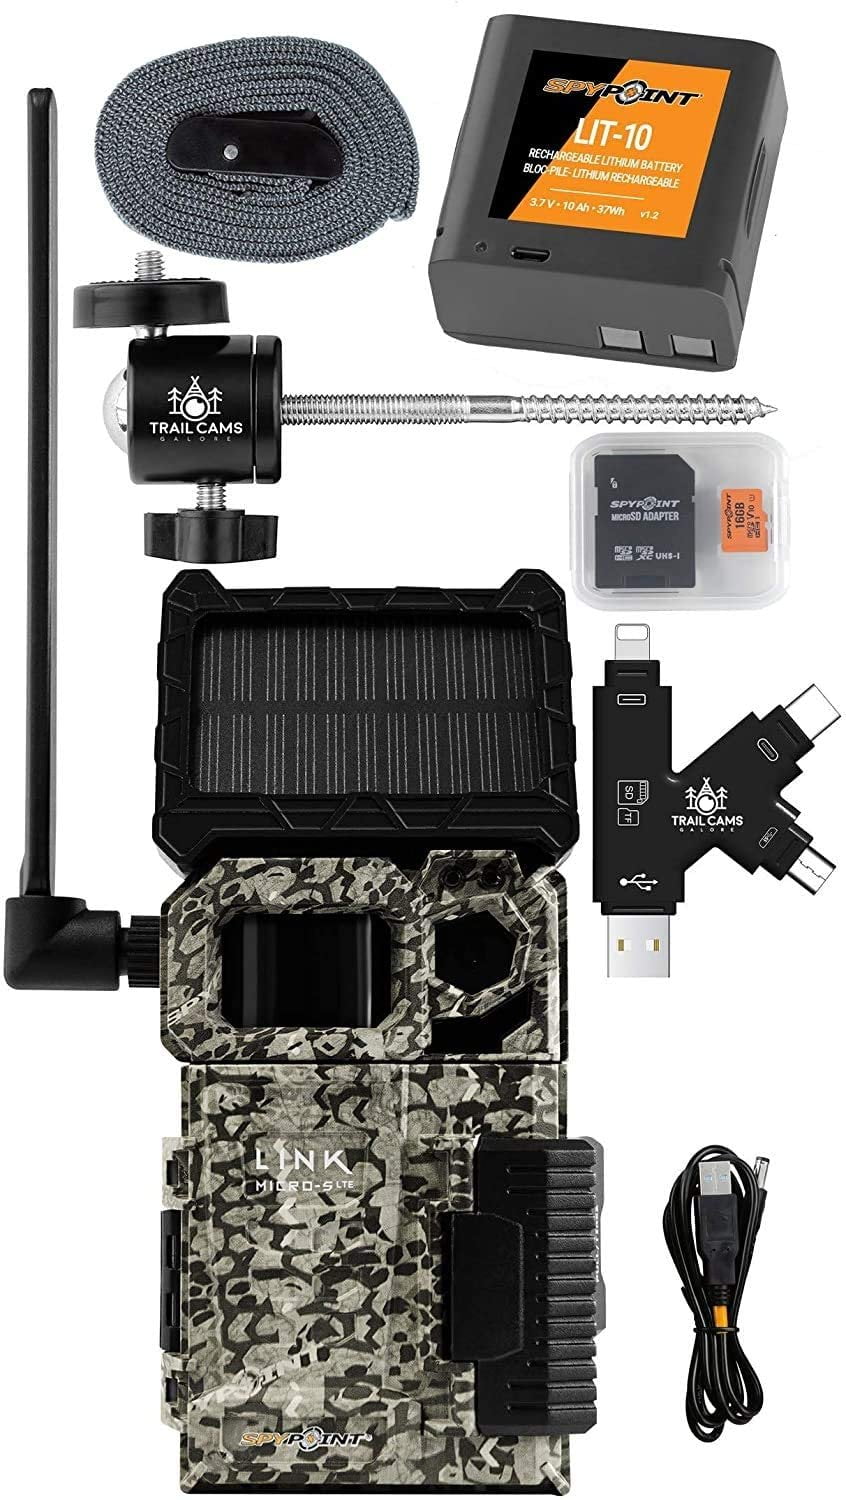 New 2020 Spypoint Link-Micro-LTE AT&T USA Cellular 10MP Low Glow IR Trail Camera 